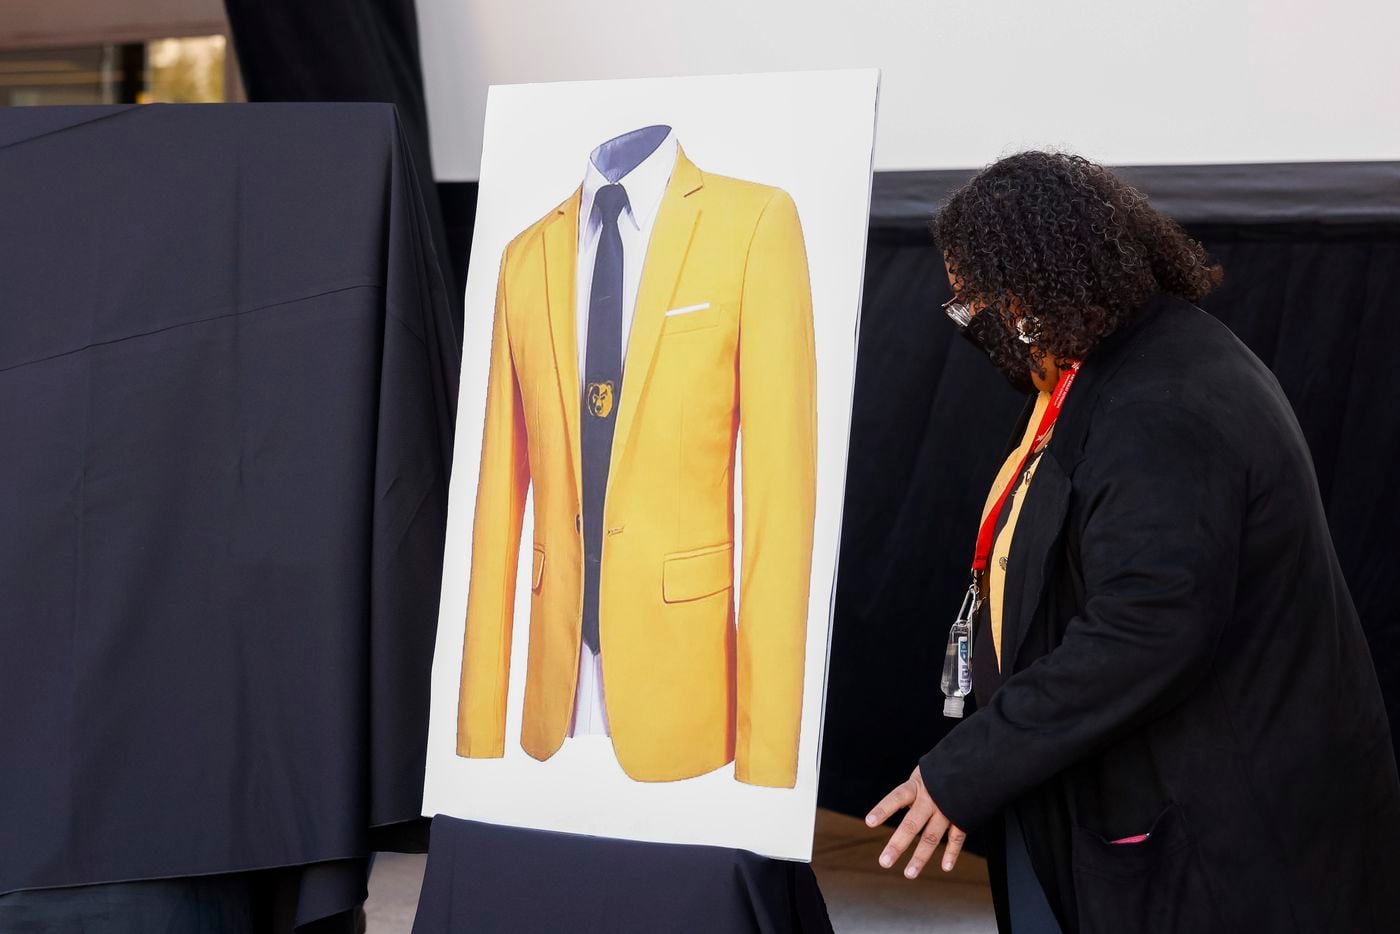 A rendering of the suit that will be given to members of the South Oak Cliff team is unveiled during a ceremony recognizing South Oak Cliff’s UIL Class 5A Division II football state championship at Dallas City Hall in Dallas, on Wednesday, Jan. 12, 2022. The suits are being donated by Reveal Suits founder Carlton Dixon.